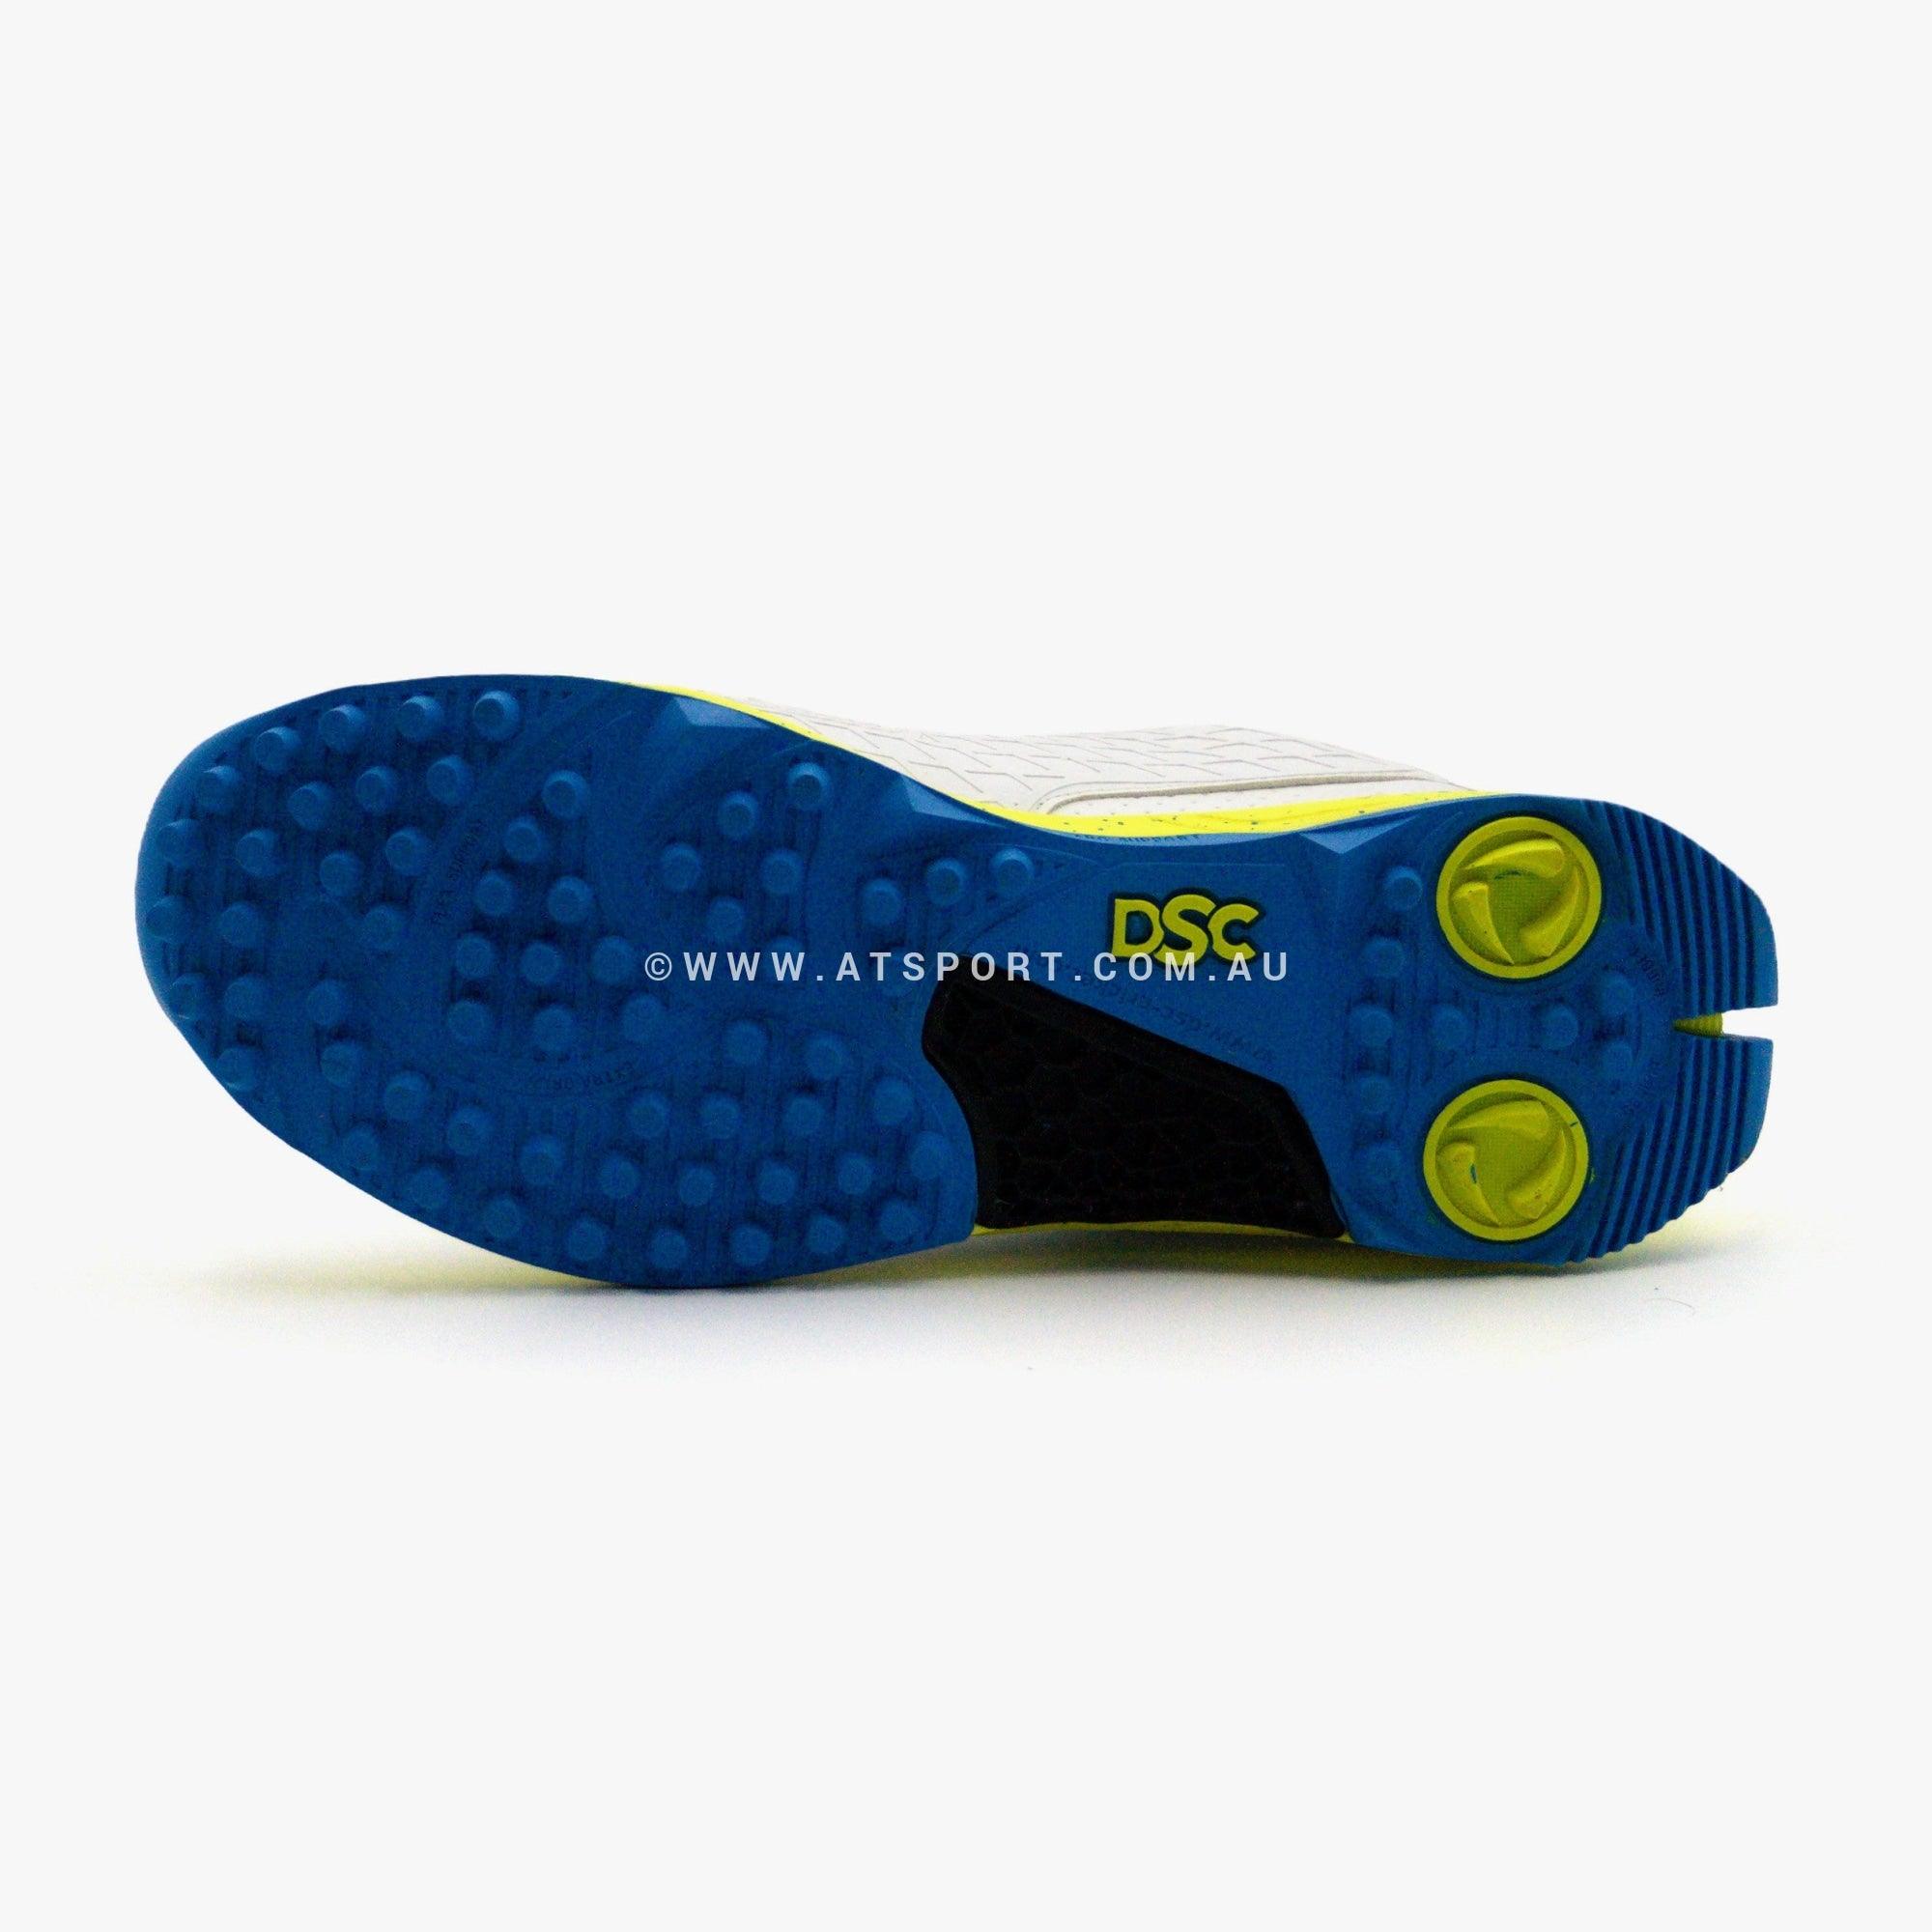 DSC Jaffa 22 Rubber Cricket Shoes - Yellow / Blue - AT Sports